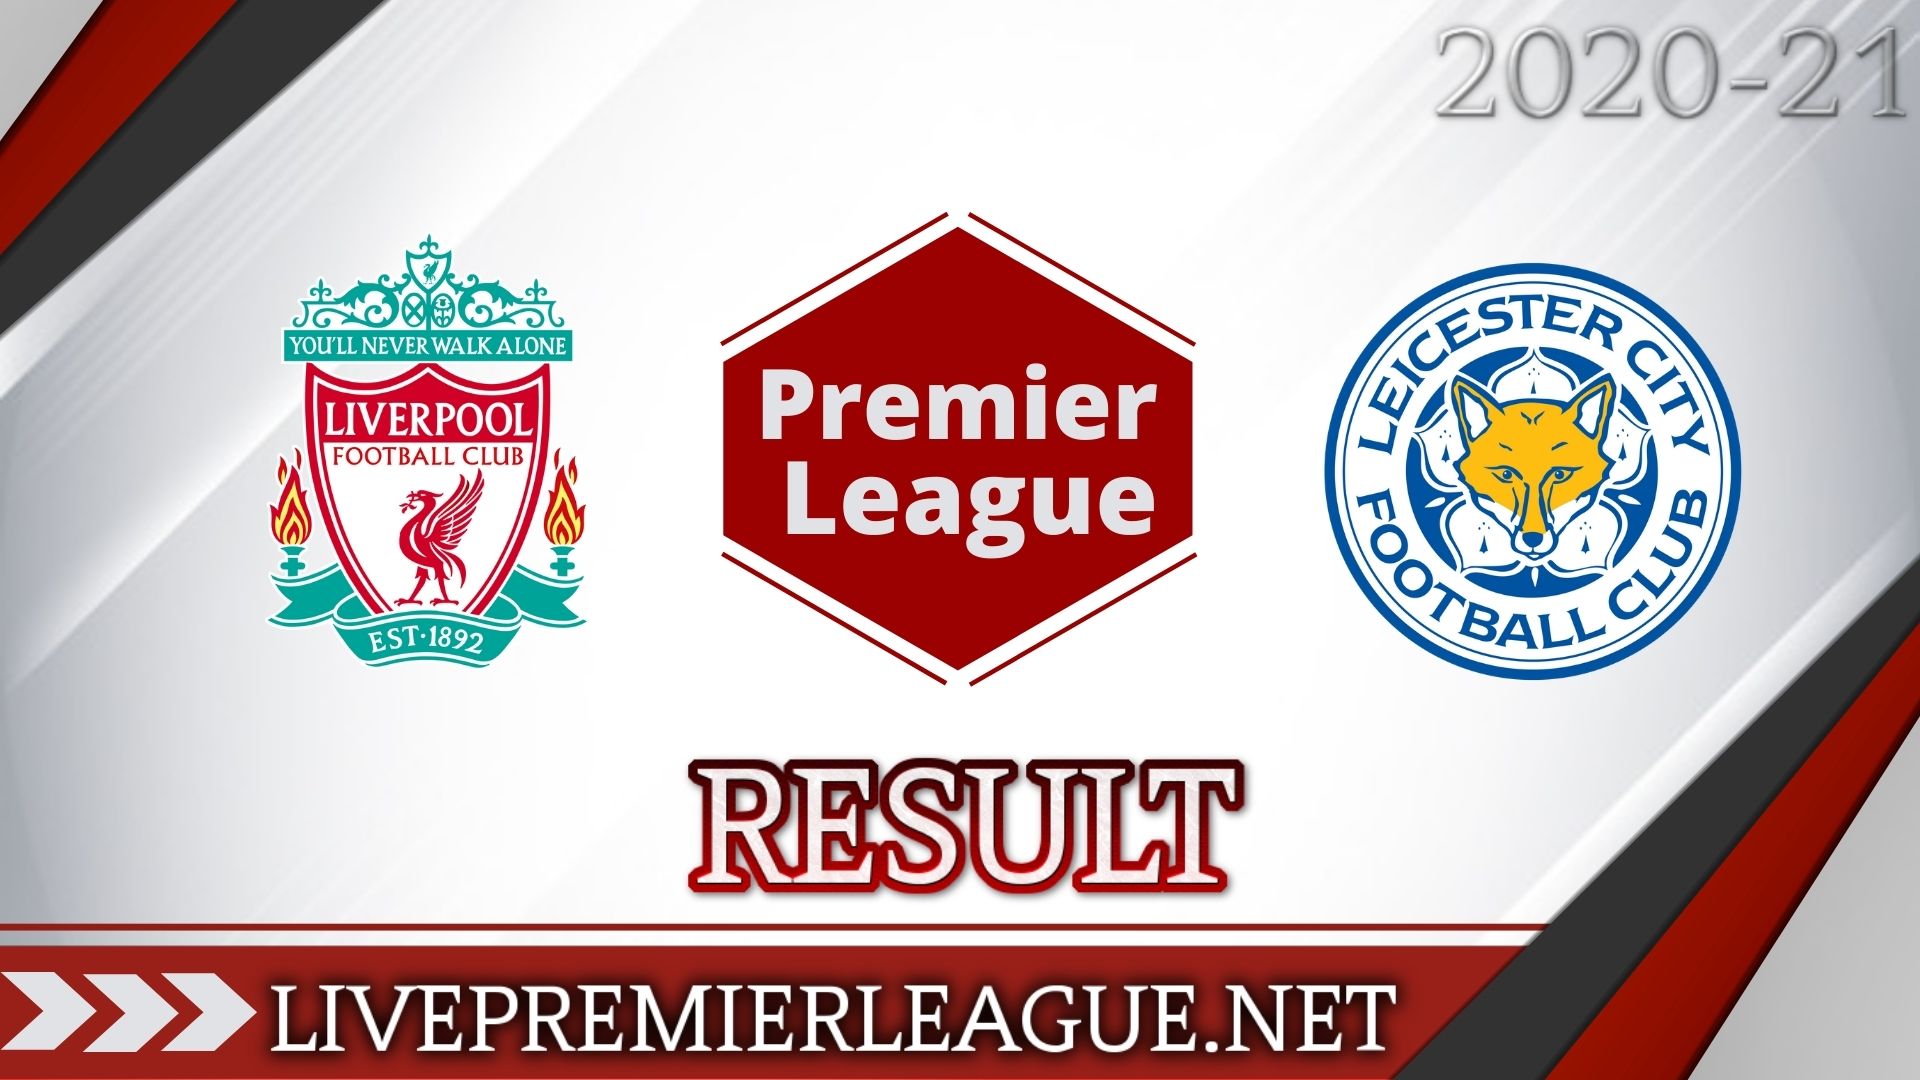 Liverpool Vs Leicester City | Week 9 Result 2020